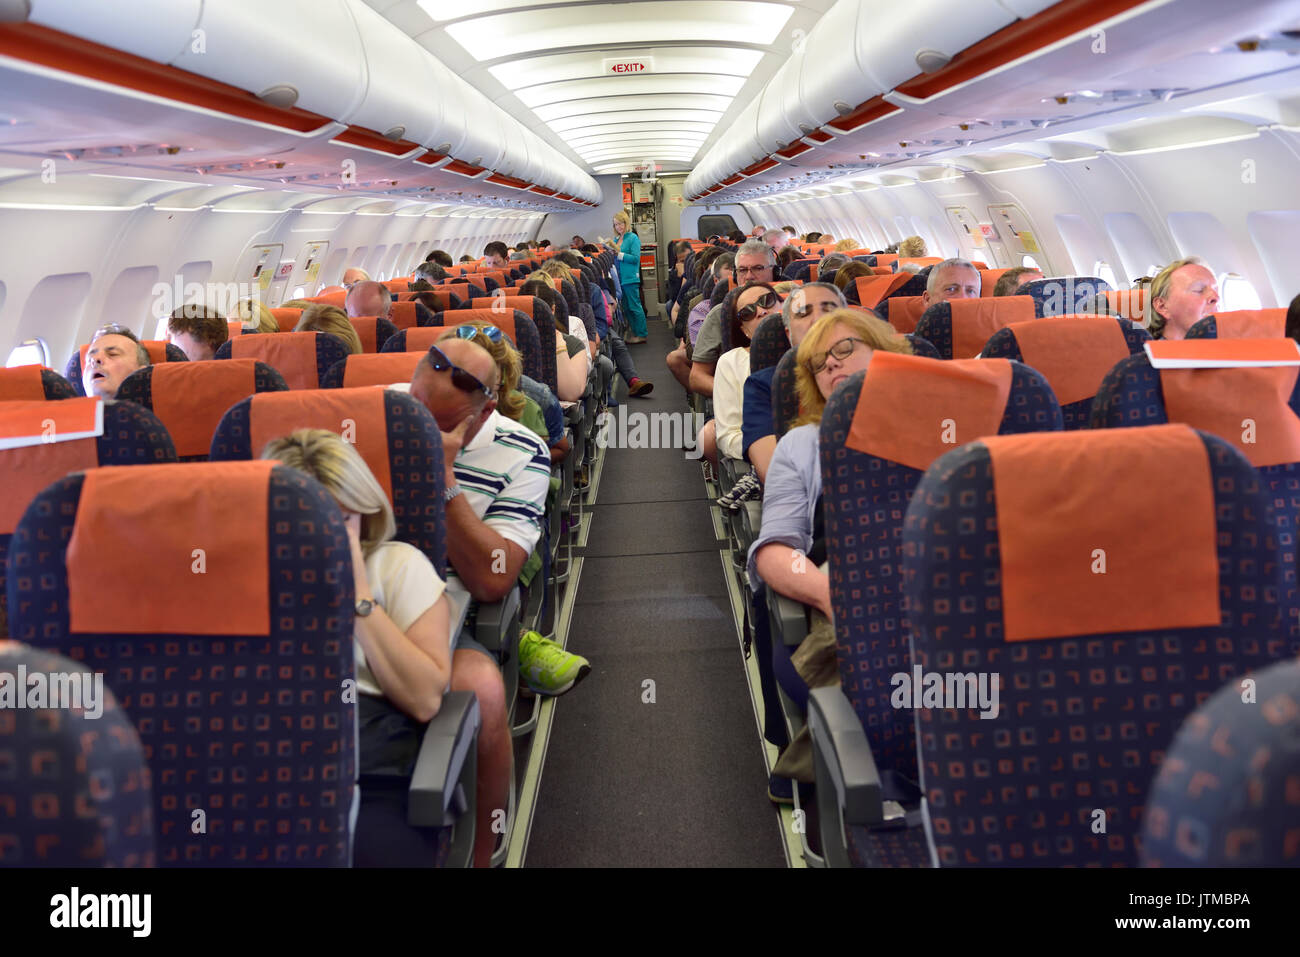 inside-commercial-airplane-cabin-during-flight-with-passengers-mainly-JTMBPA.jpg